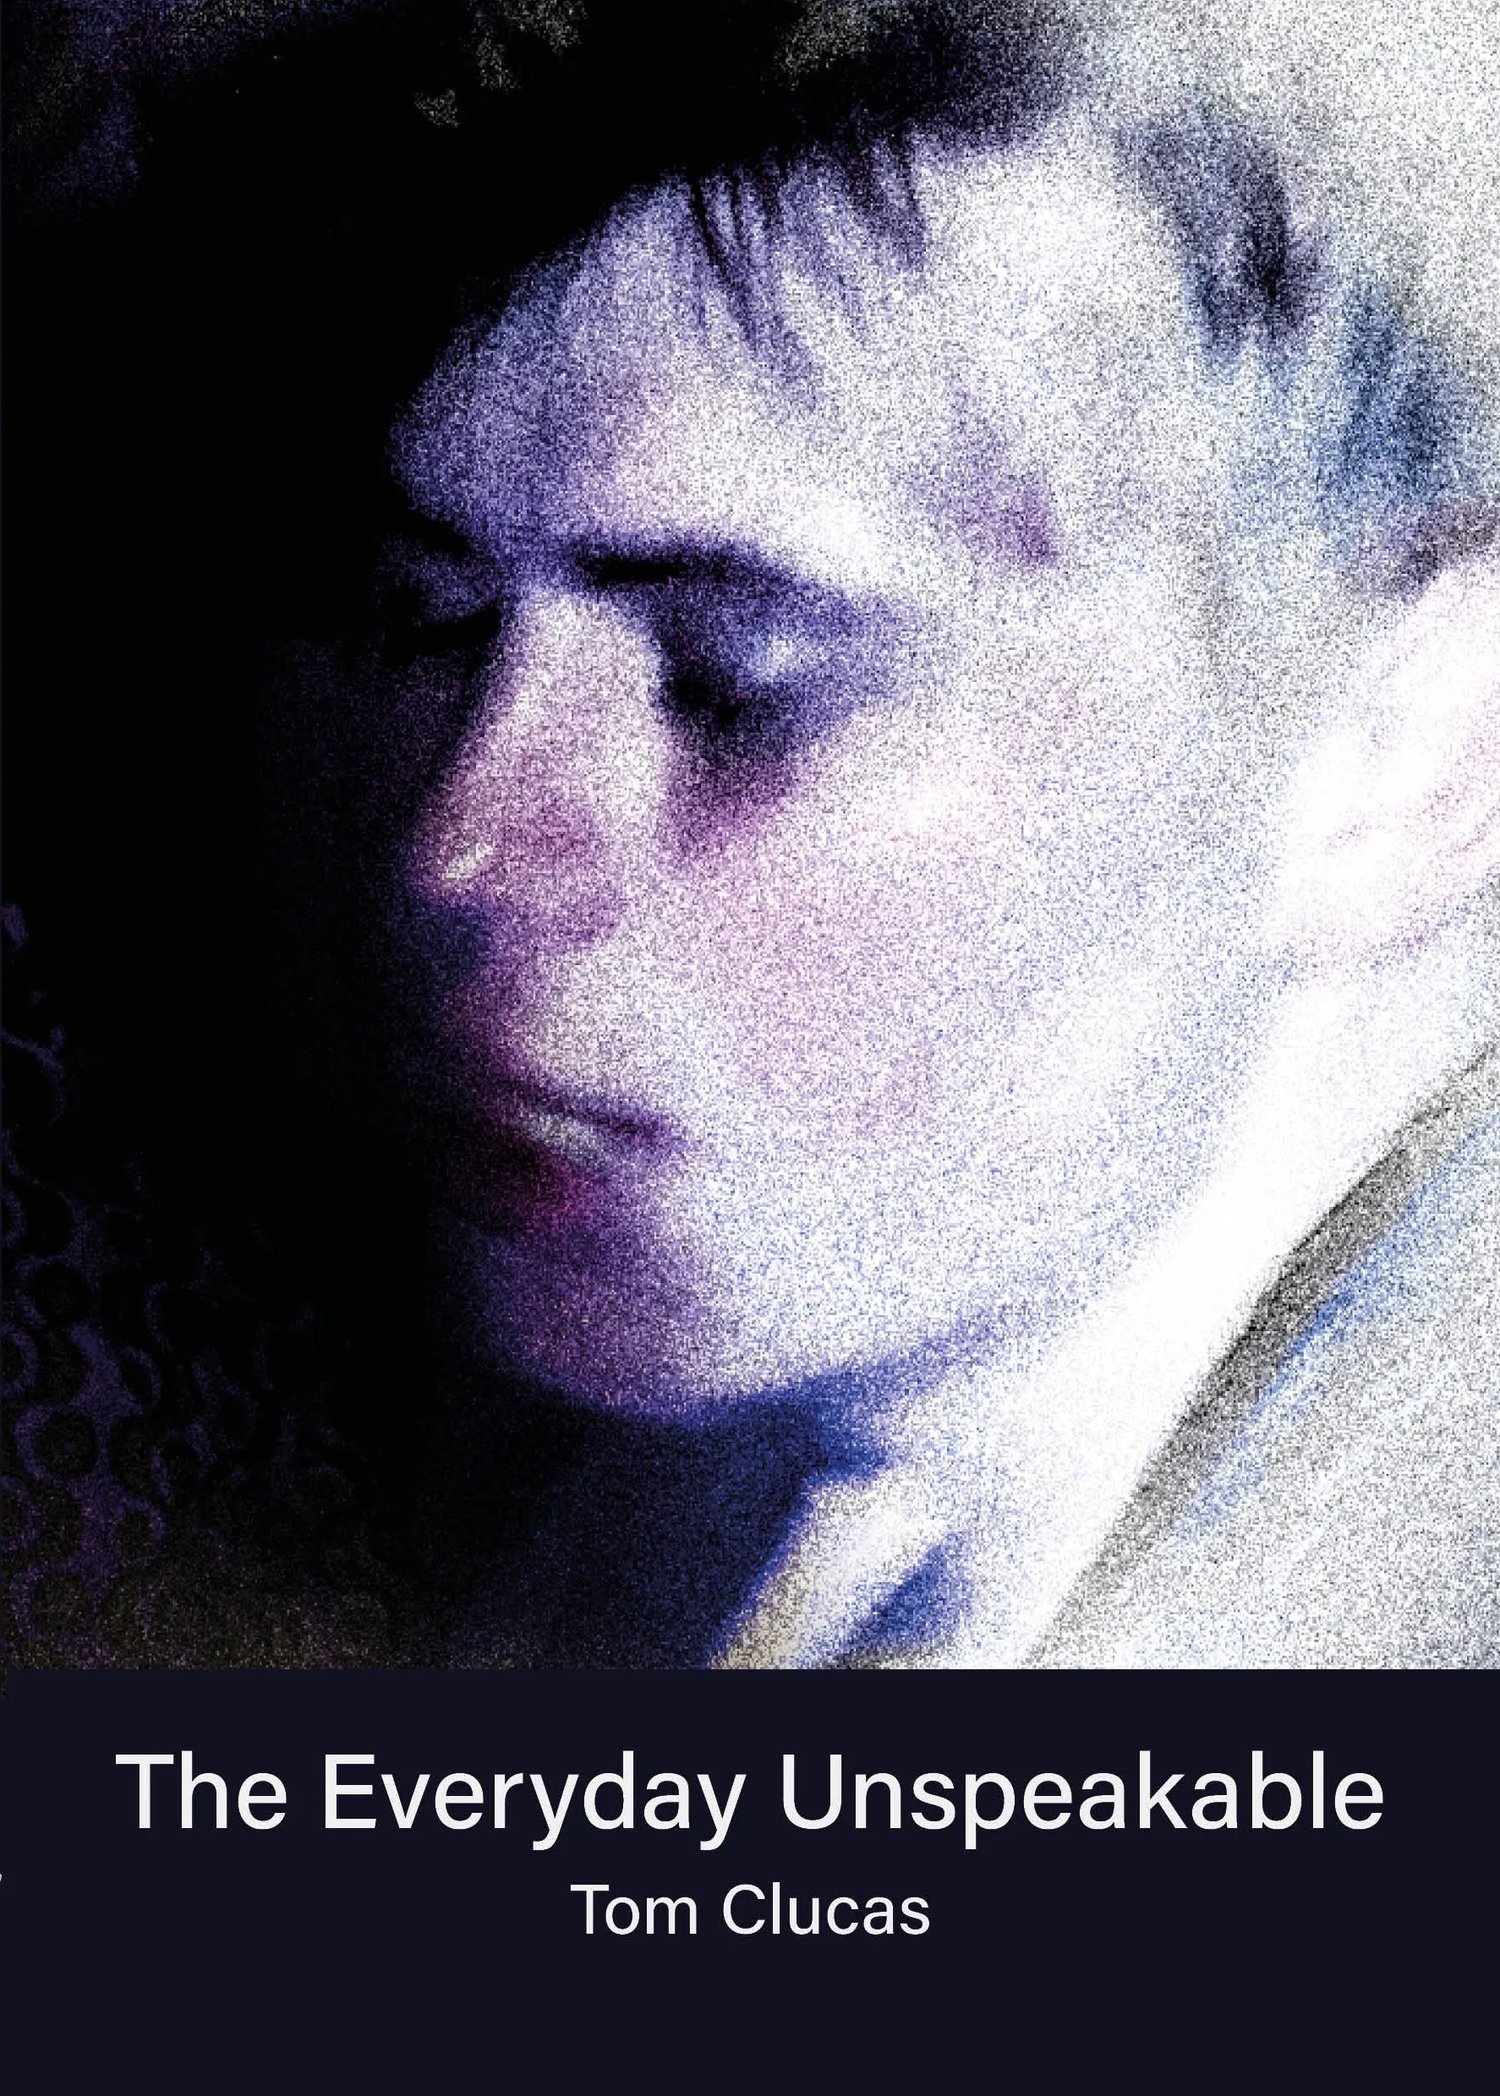 The Everyday Unspeakable by Tom Clucas